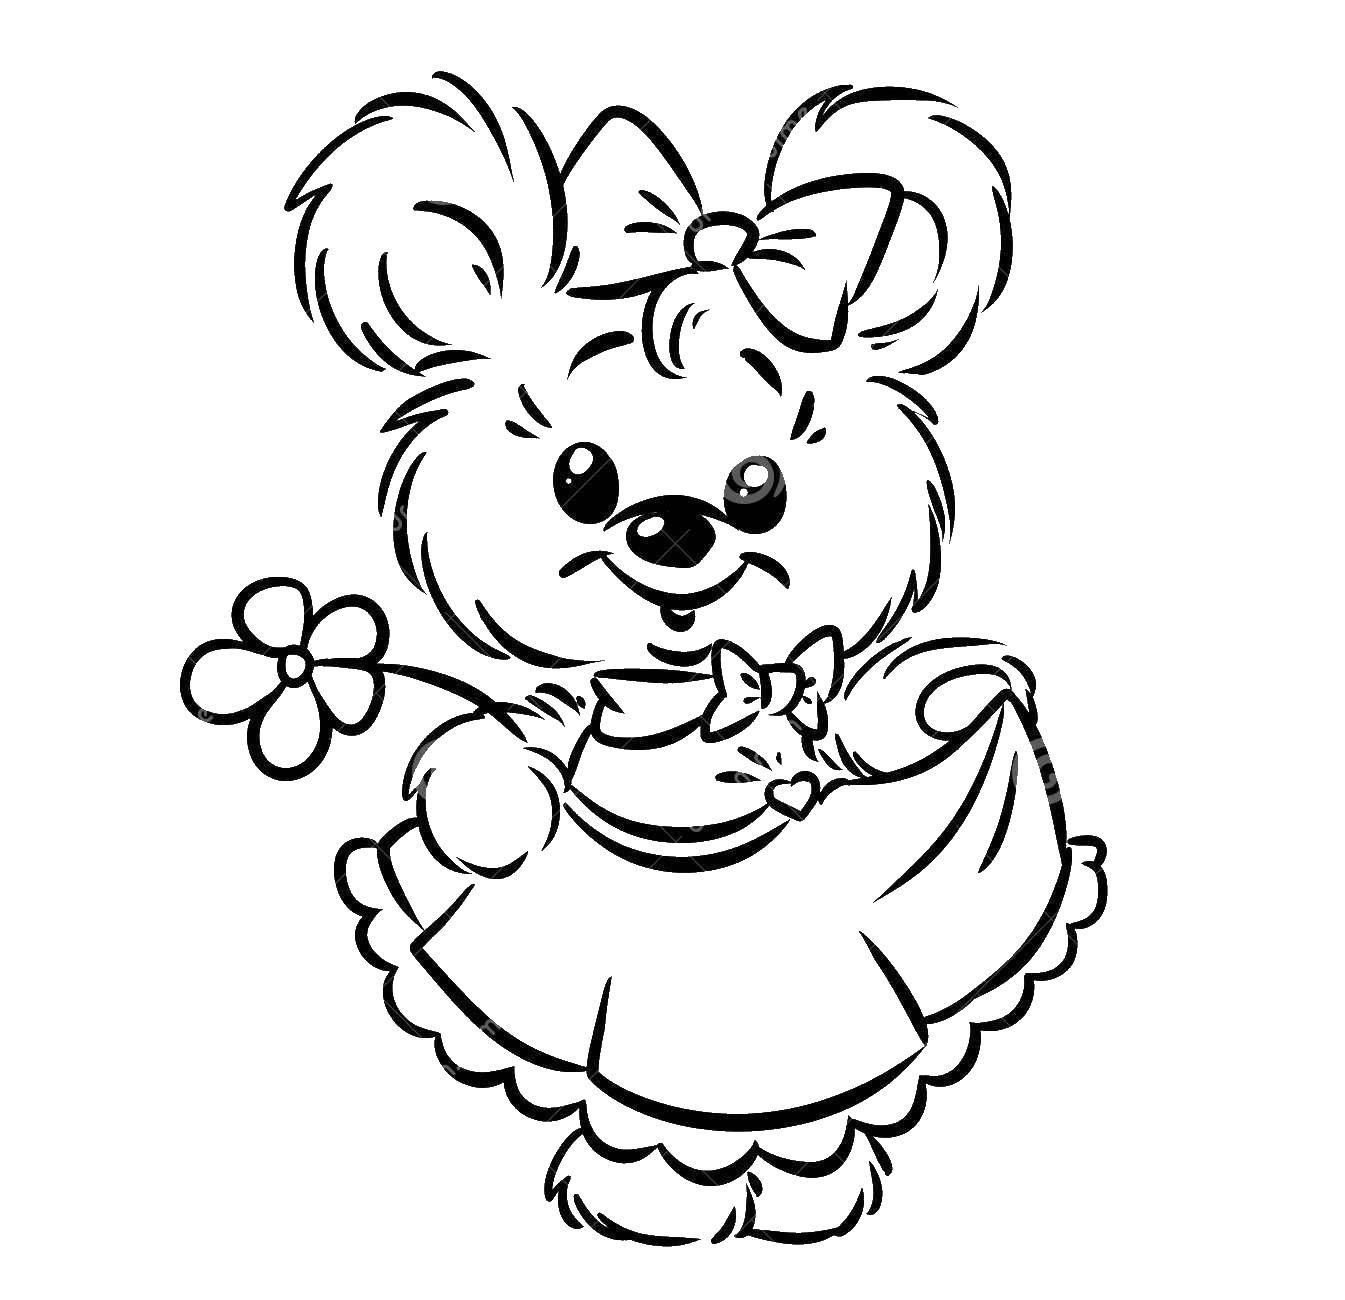 Dazzling bear with a bow coloring book